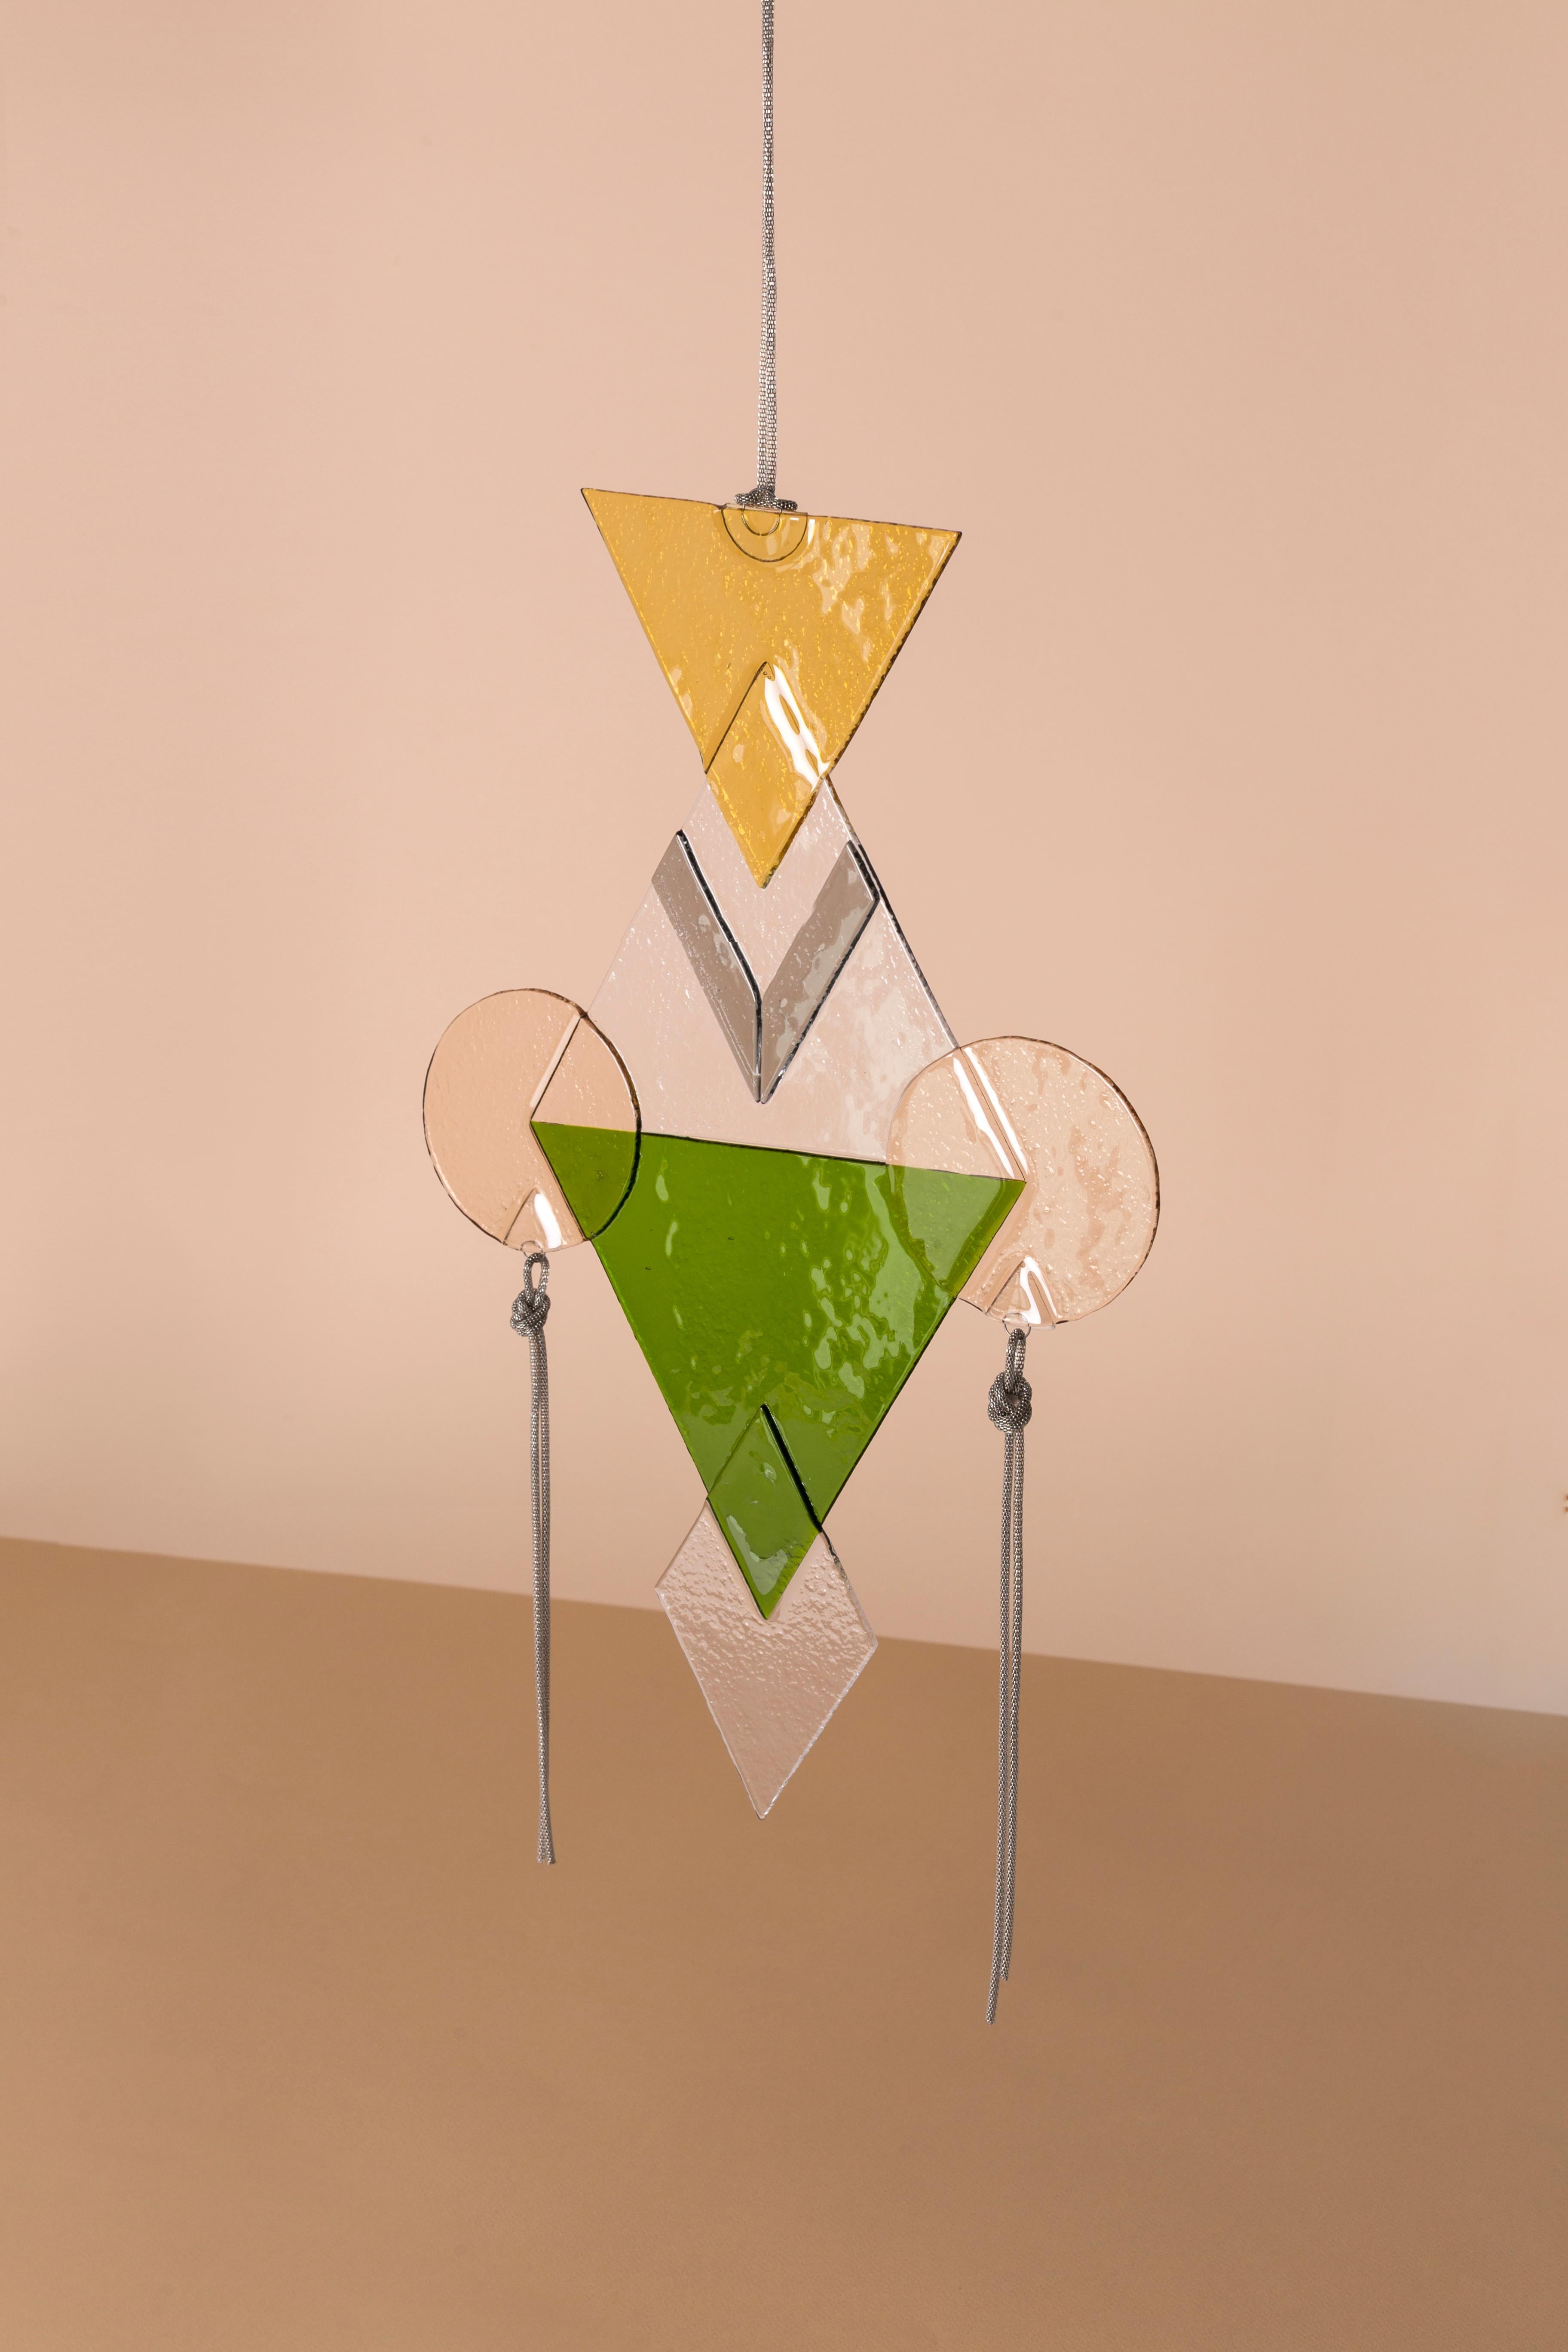 Mojo Amulet Silver by Serena Confalonieri
Dimensions: 1 x 30 x H 48 cm
Materials: Artisanal glass fusion with decorative aluminium chains
Glass colors: Transparent, yellow, grey, pink, green

Serena Confalonieri (1980) is an independent